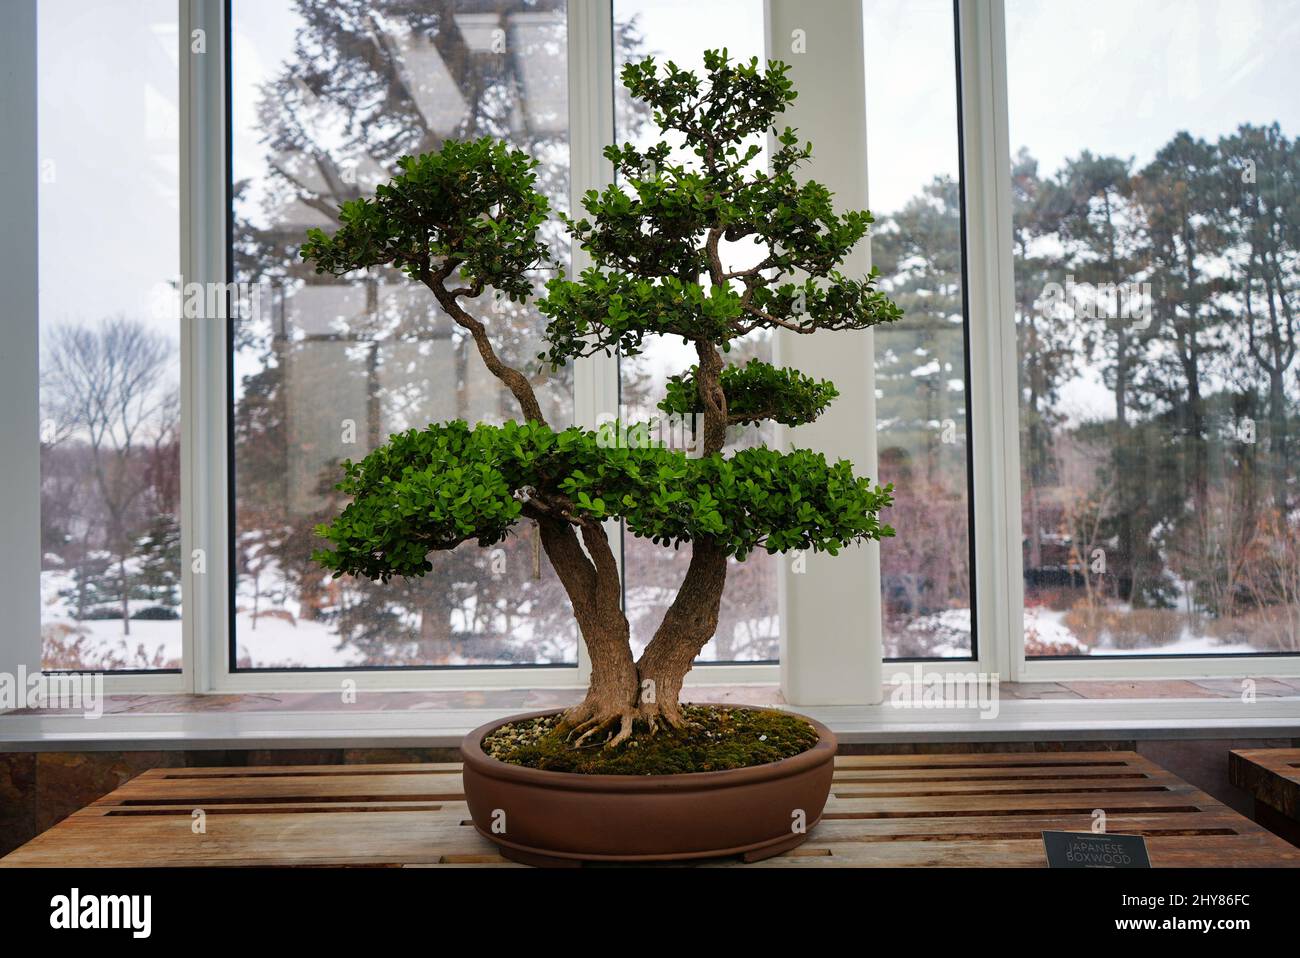 Bonsai tree growing in a dark marble pot on a wooden table by the window in bright light Stock Photo